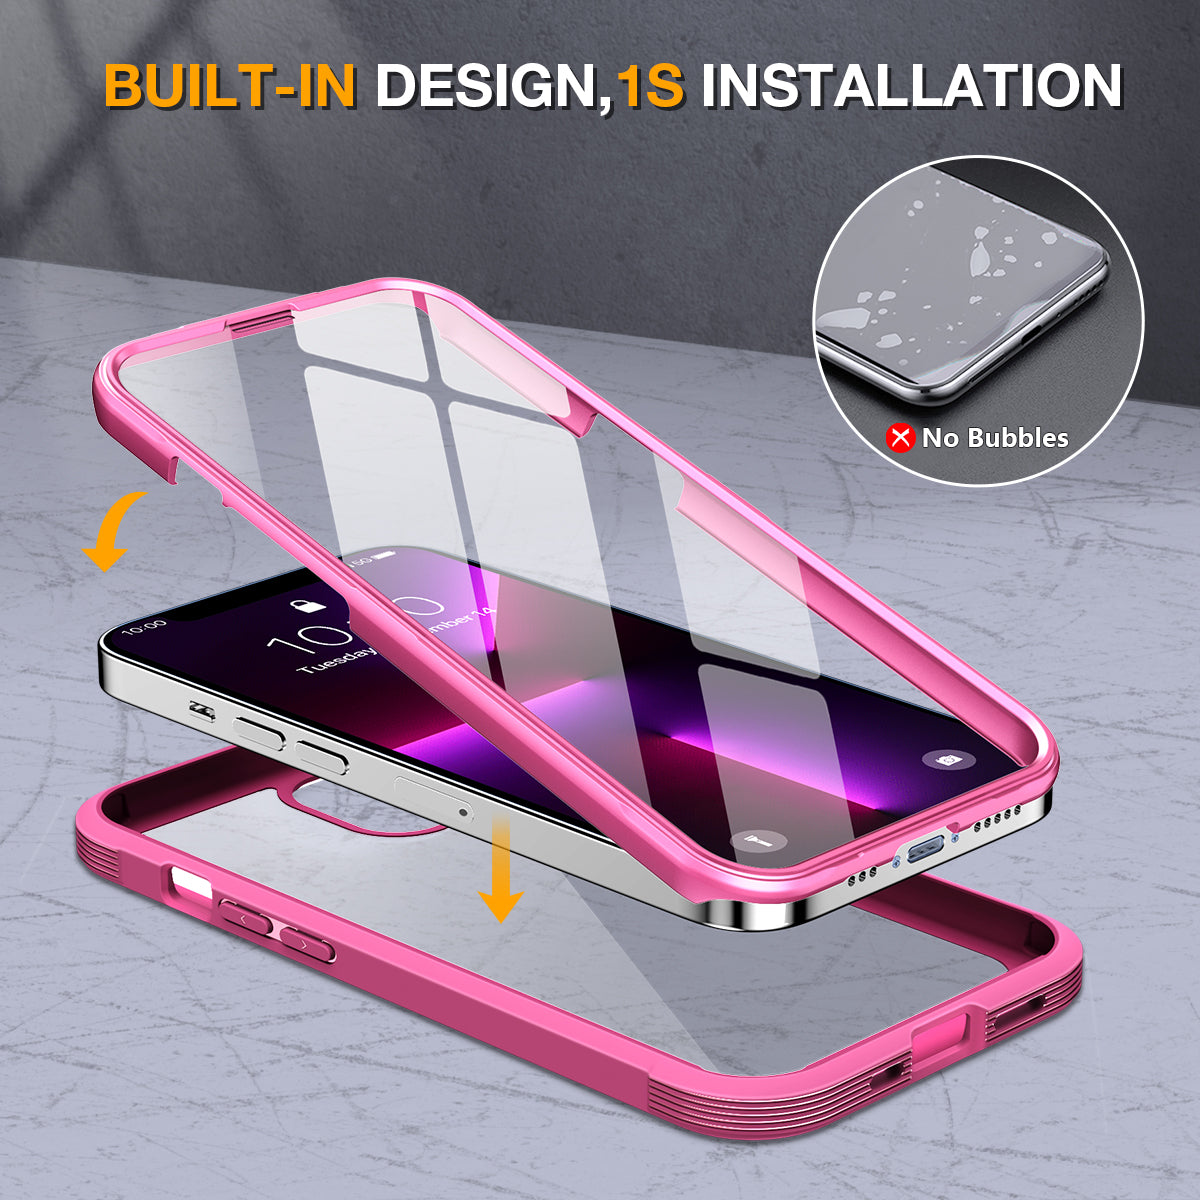 Miracase Glass Case for iPhone 13 Pro Max 6.7 inch, 2022 Upgrade Full-Body Clear Bumper Case with Built-in 9H Tempered Glass Screen Protector for iPhone 13 Pro Max